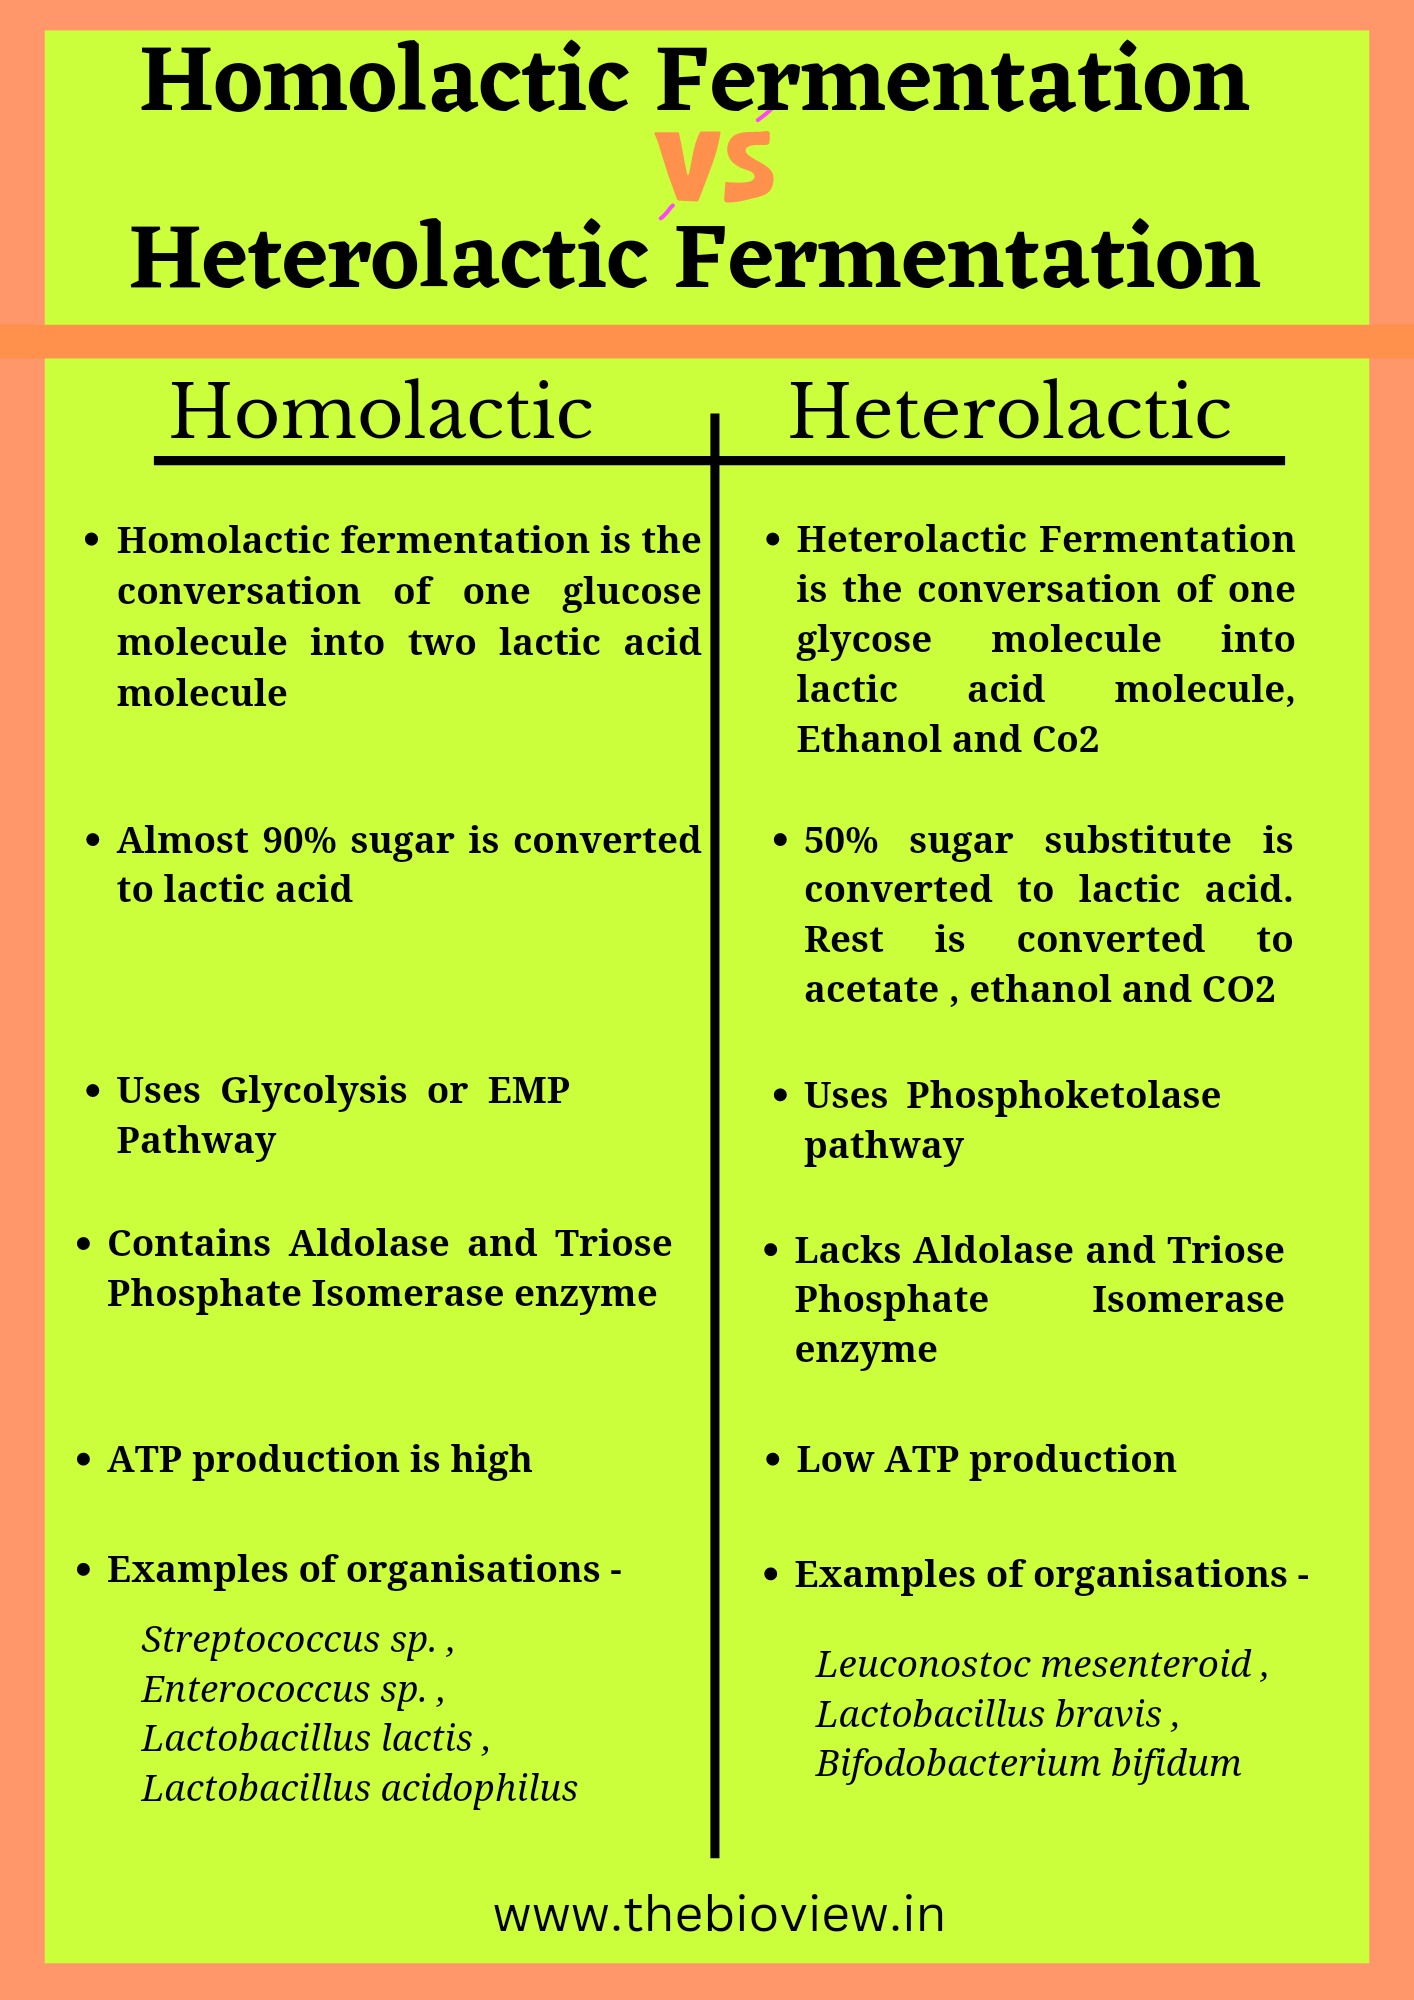 Difference between Homolactic Fermentation and Heterolactic Fermentation